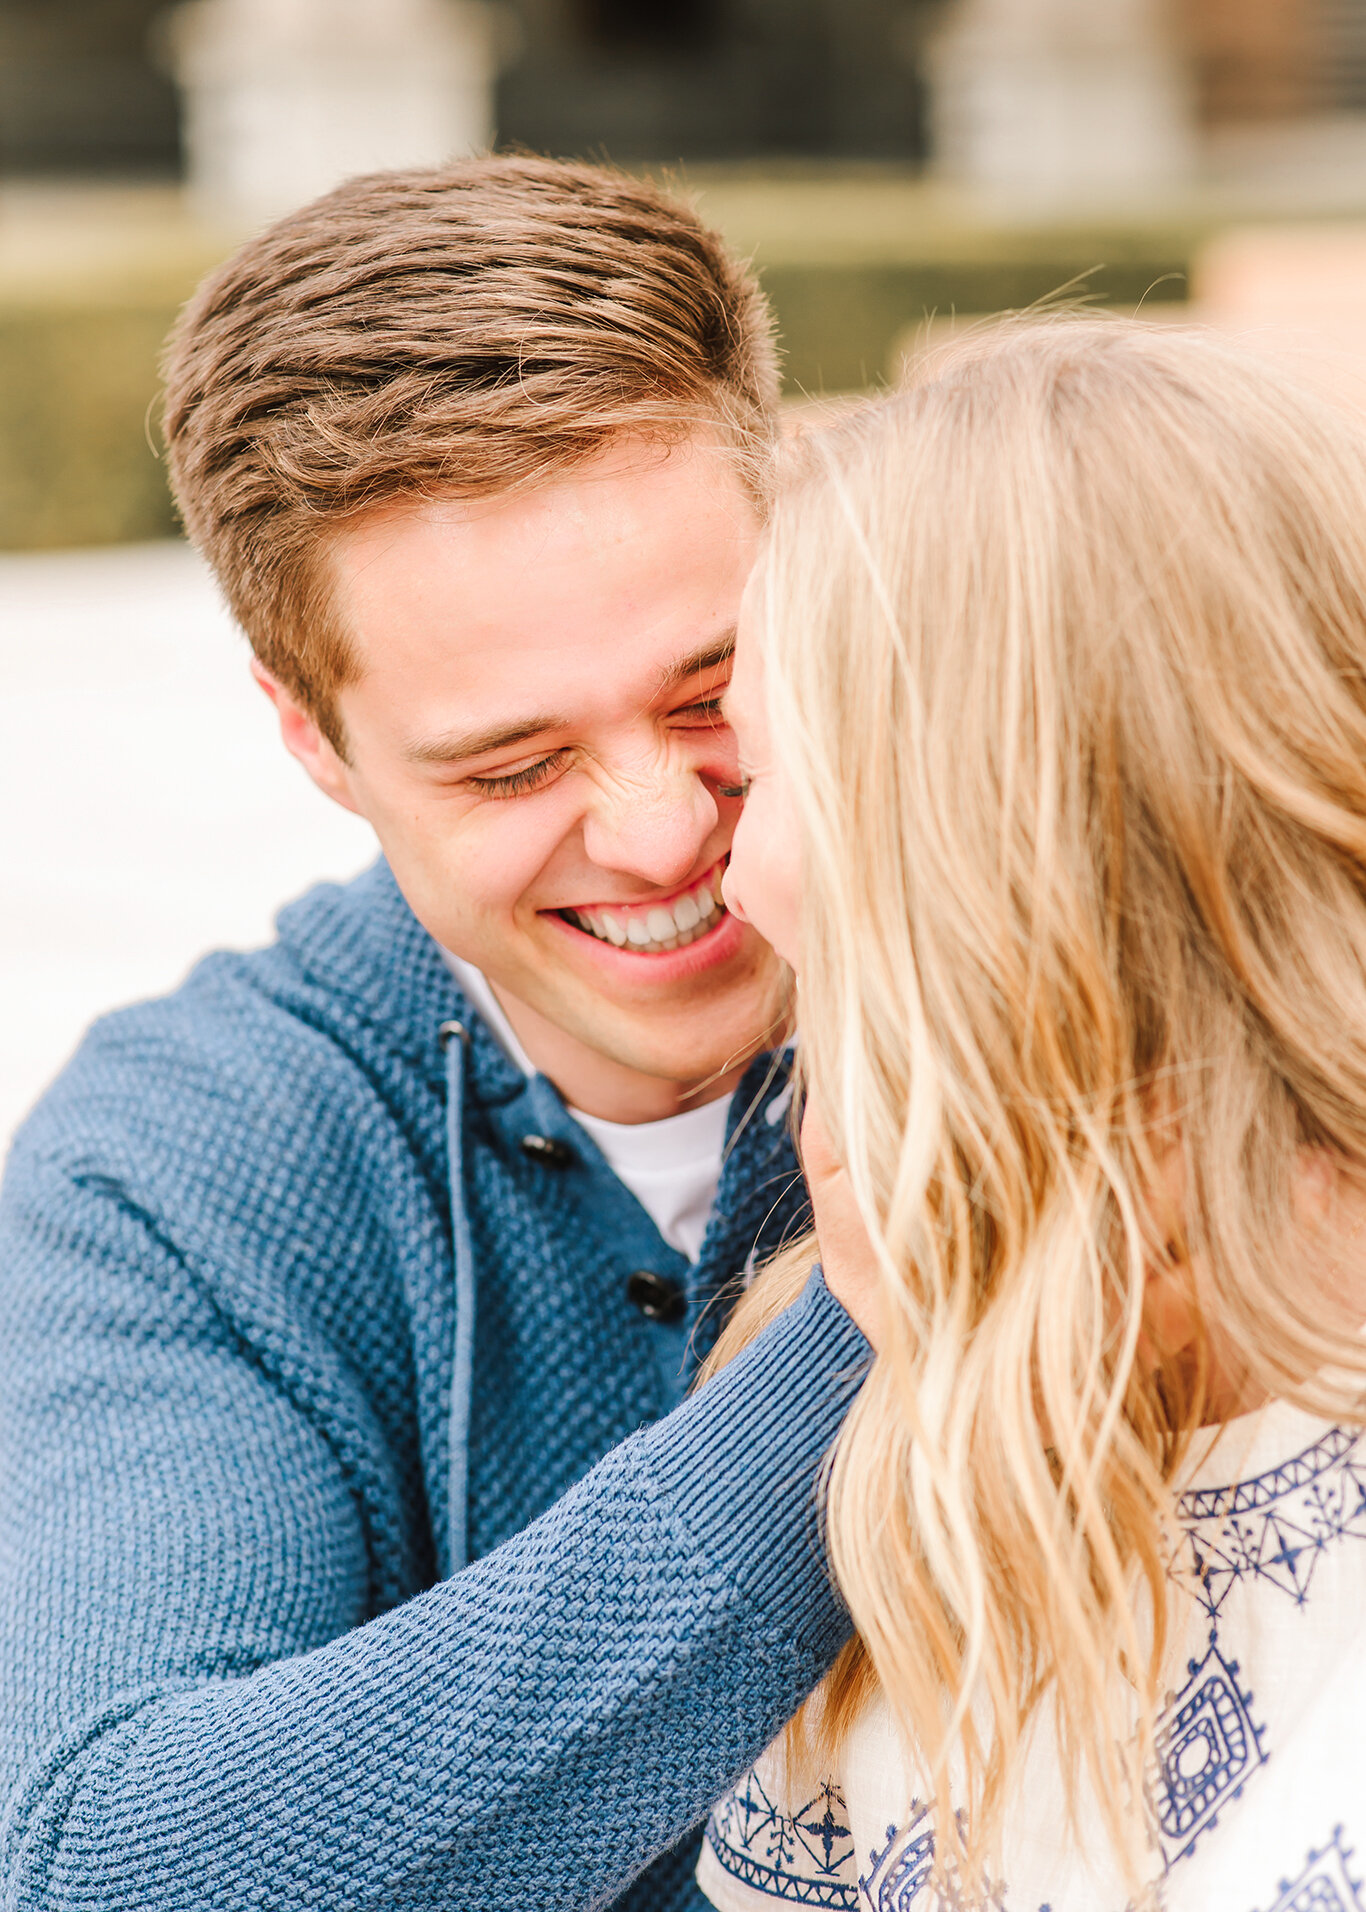  Downtown salt lake city photo session engagement session navy blue sweater navy blue thread detail loose hanging curls smiling at each other leaning in for a kiss salt lake city utah professional utah valley engagement photographer #downtownsaltlake